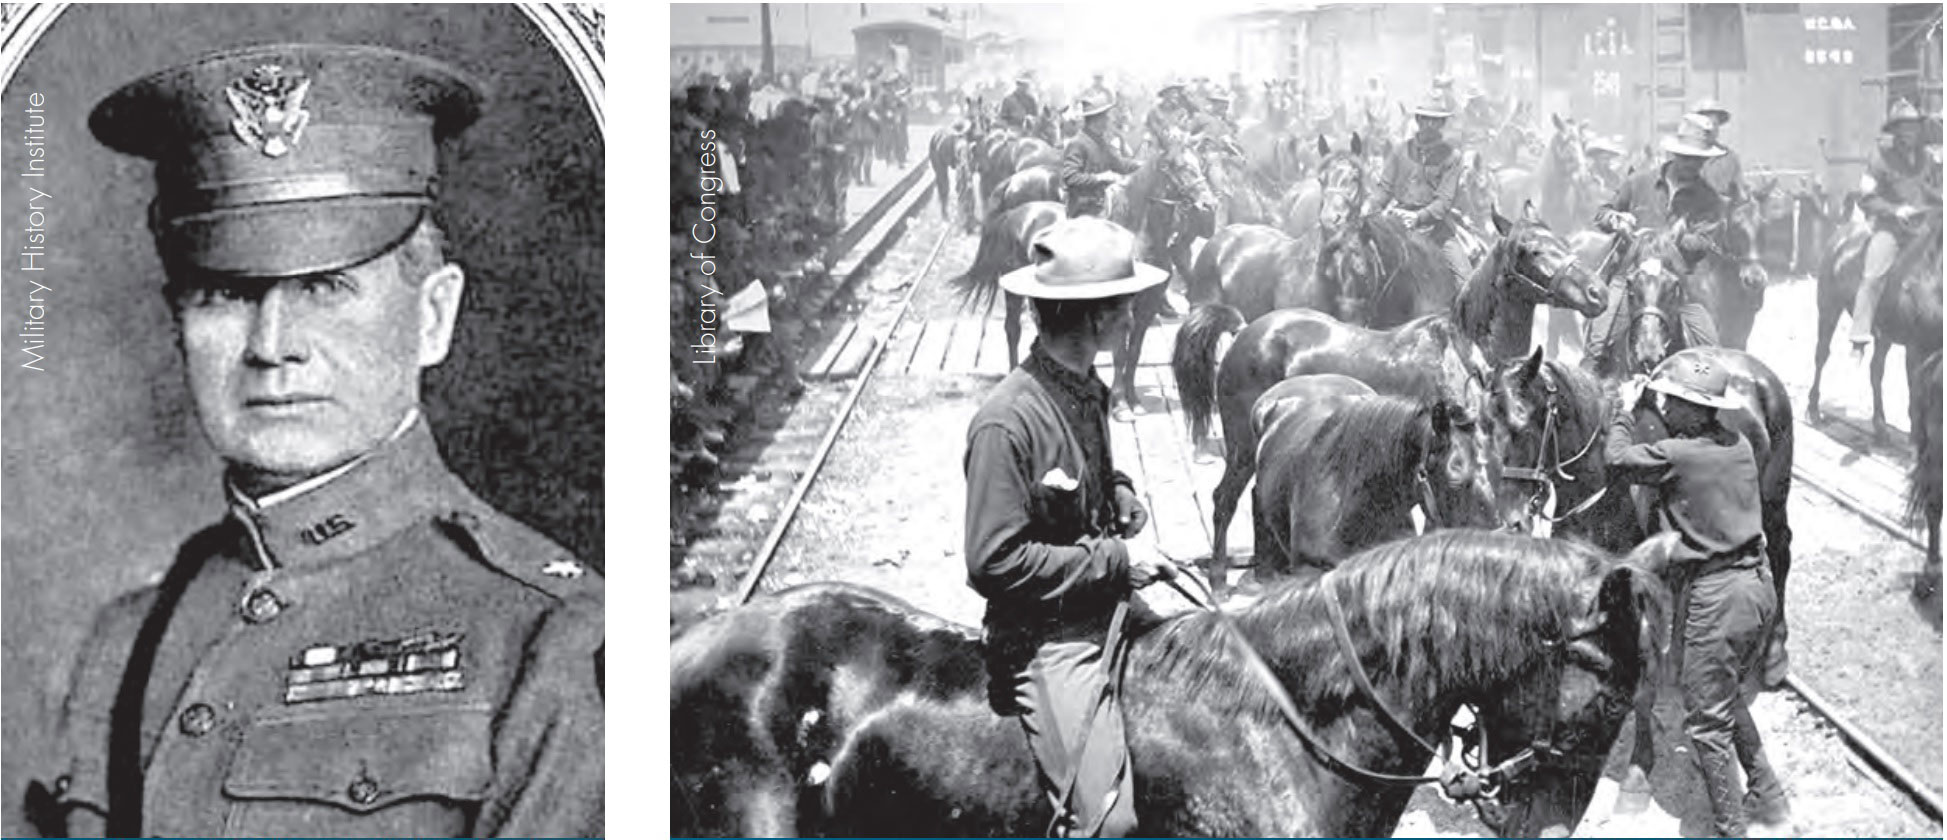 Image left: Paul Malone, pictured here as a brigadier general, c. 1918. Image right: Colonel Roosevelt’s “Rough Riders” arrive at the port of Tampa in June 1898.